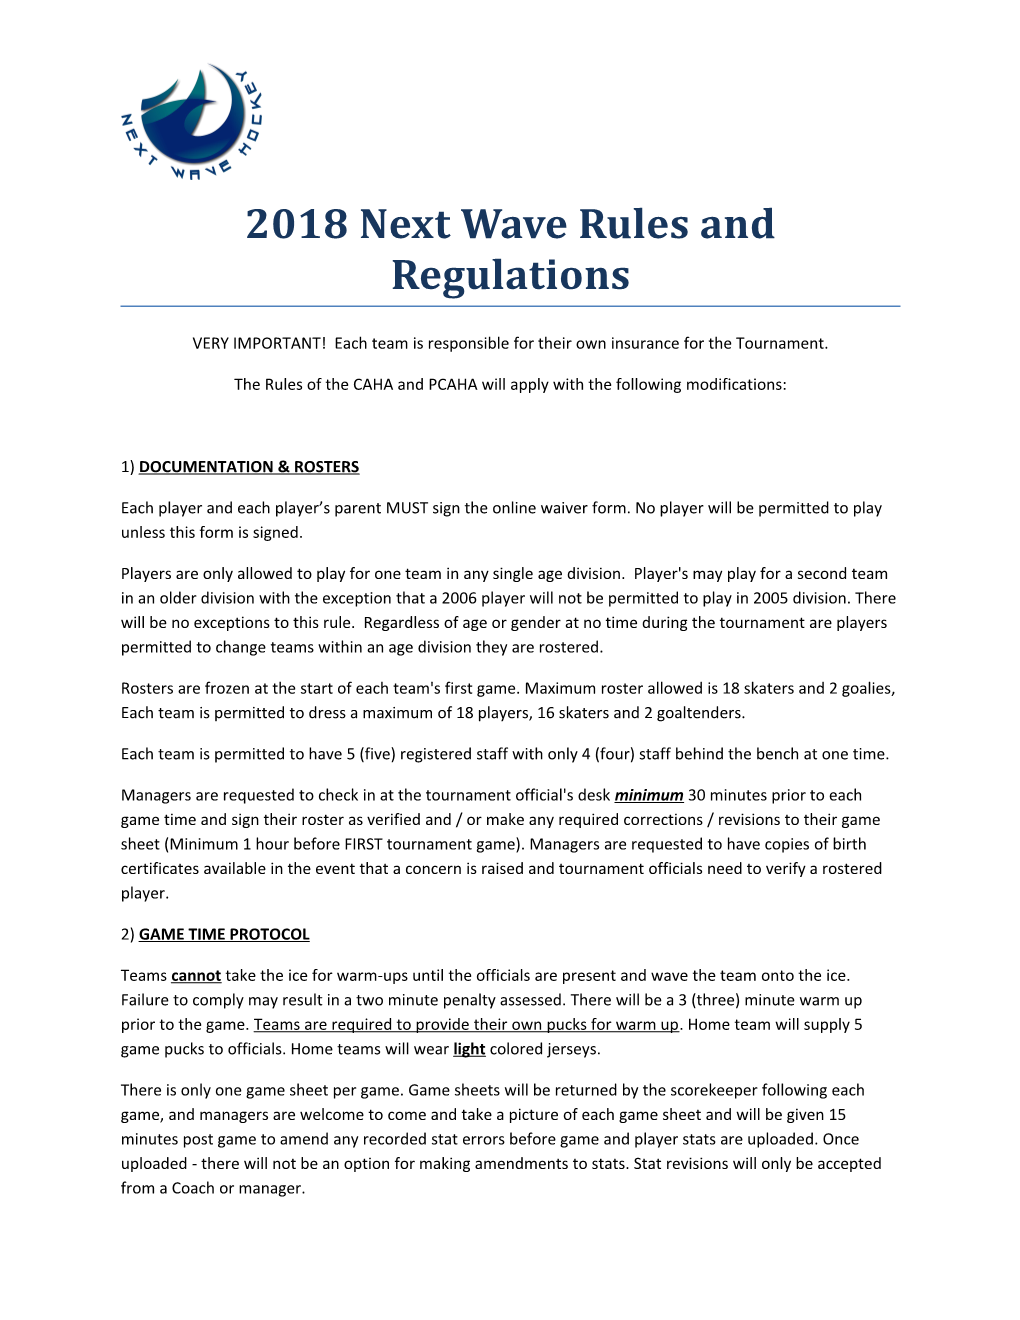 2018 Next Wave Rules and Regulations